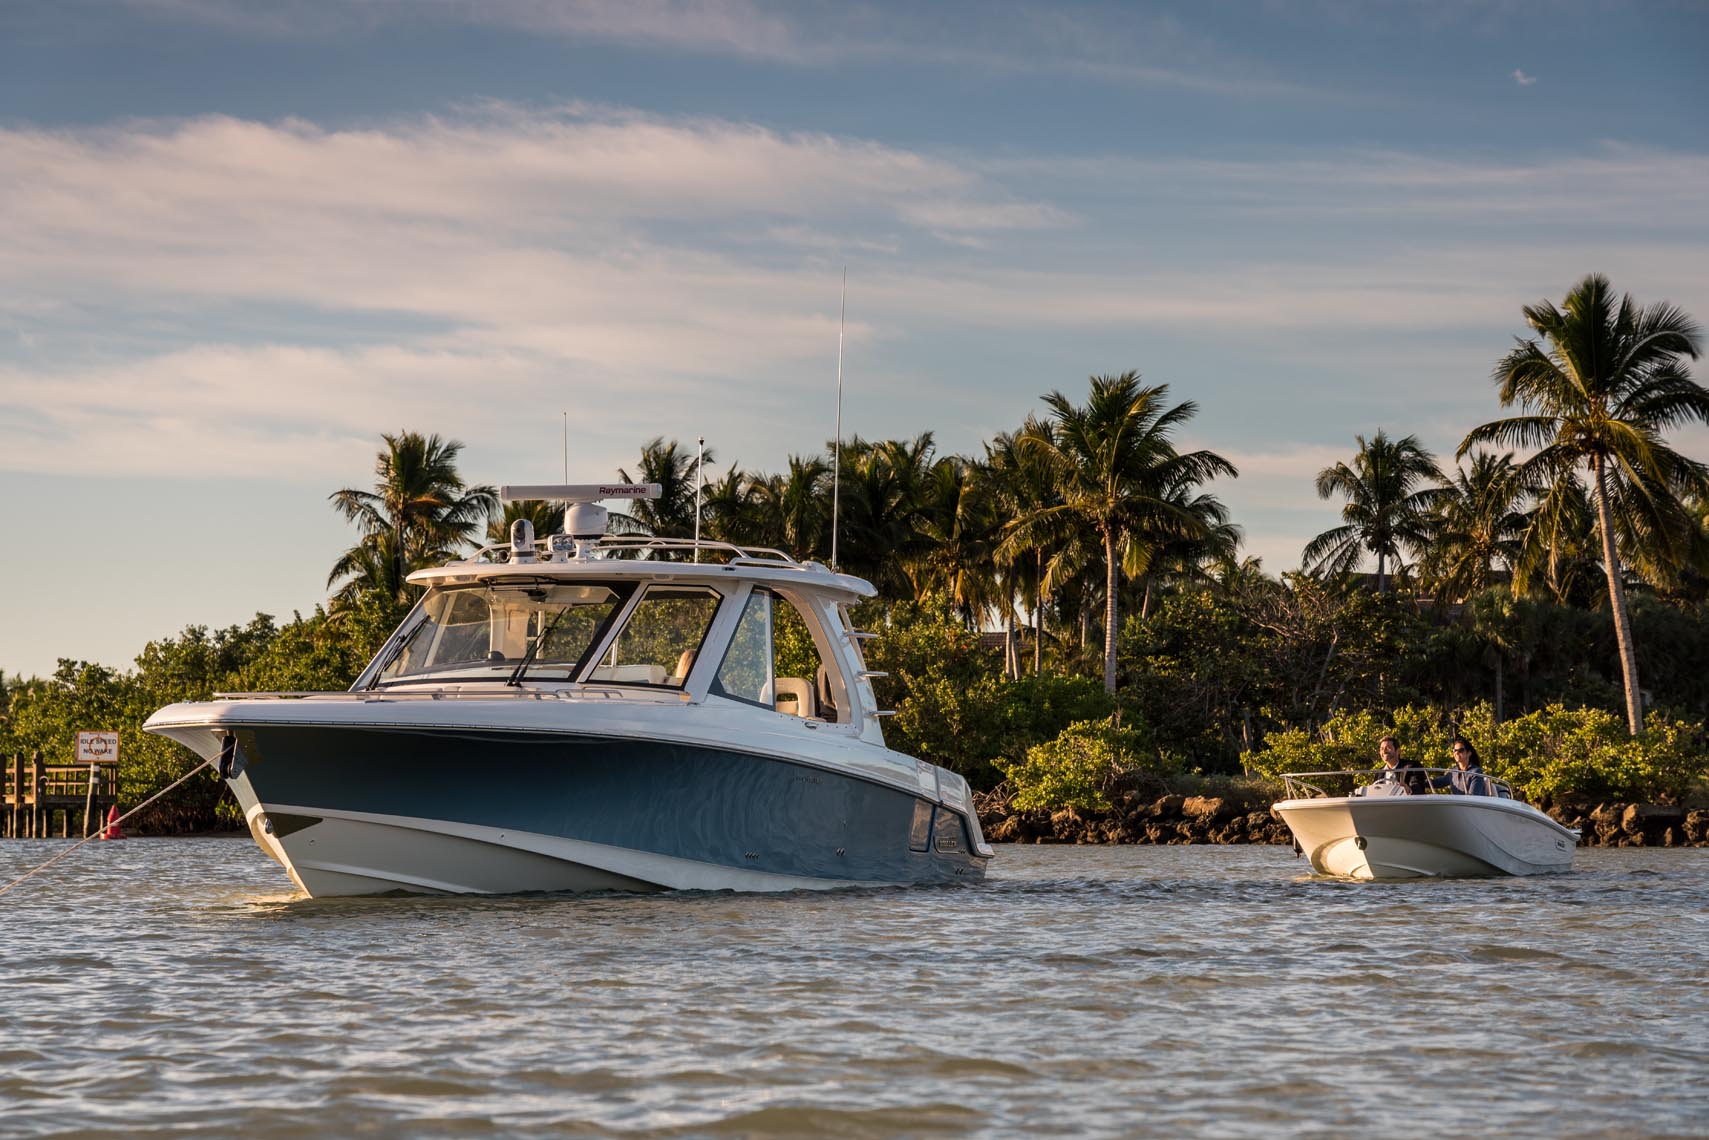 Boat boating  luxury yacht marine lifestyle Florida photographer Steinberger Boat boating  luxury yacht marine lifestyle photographer Steinberger shoots in Florida, Minnesota, Wisconsin, Tennessee, worldwide 